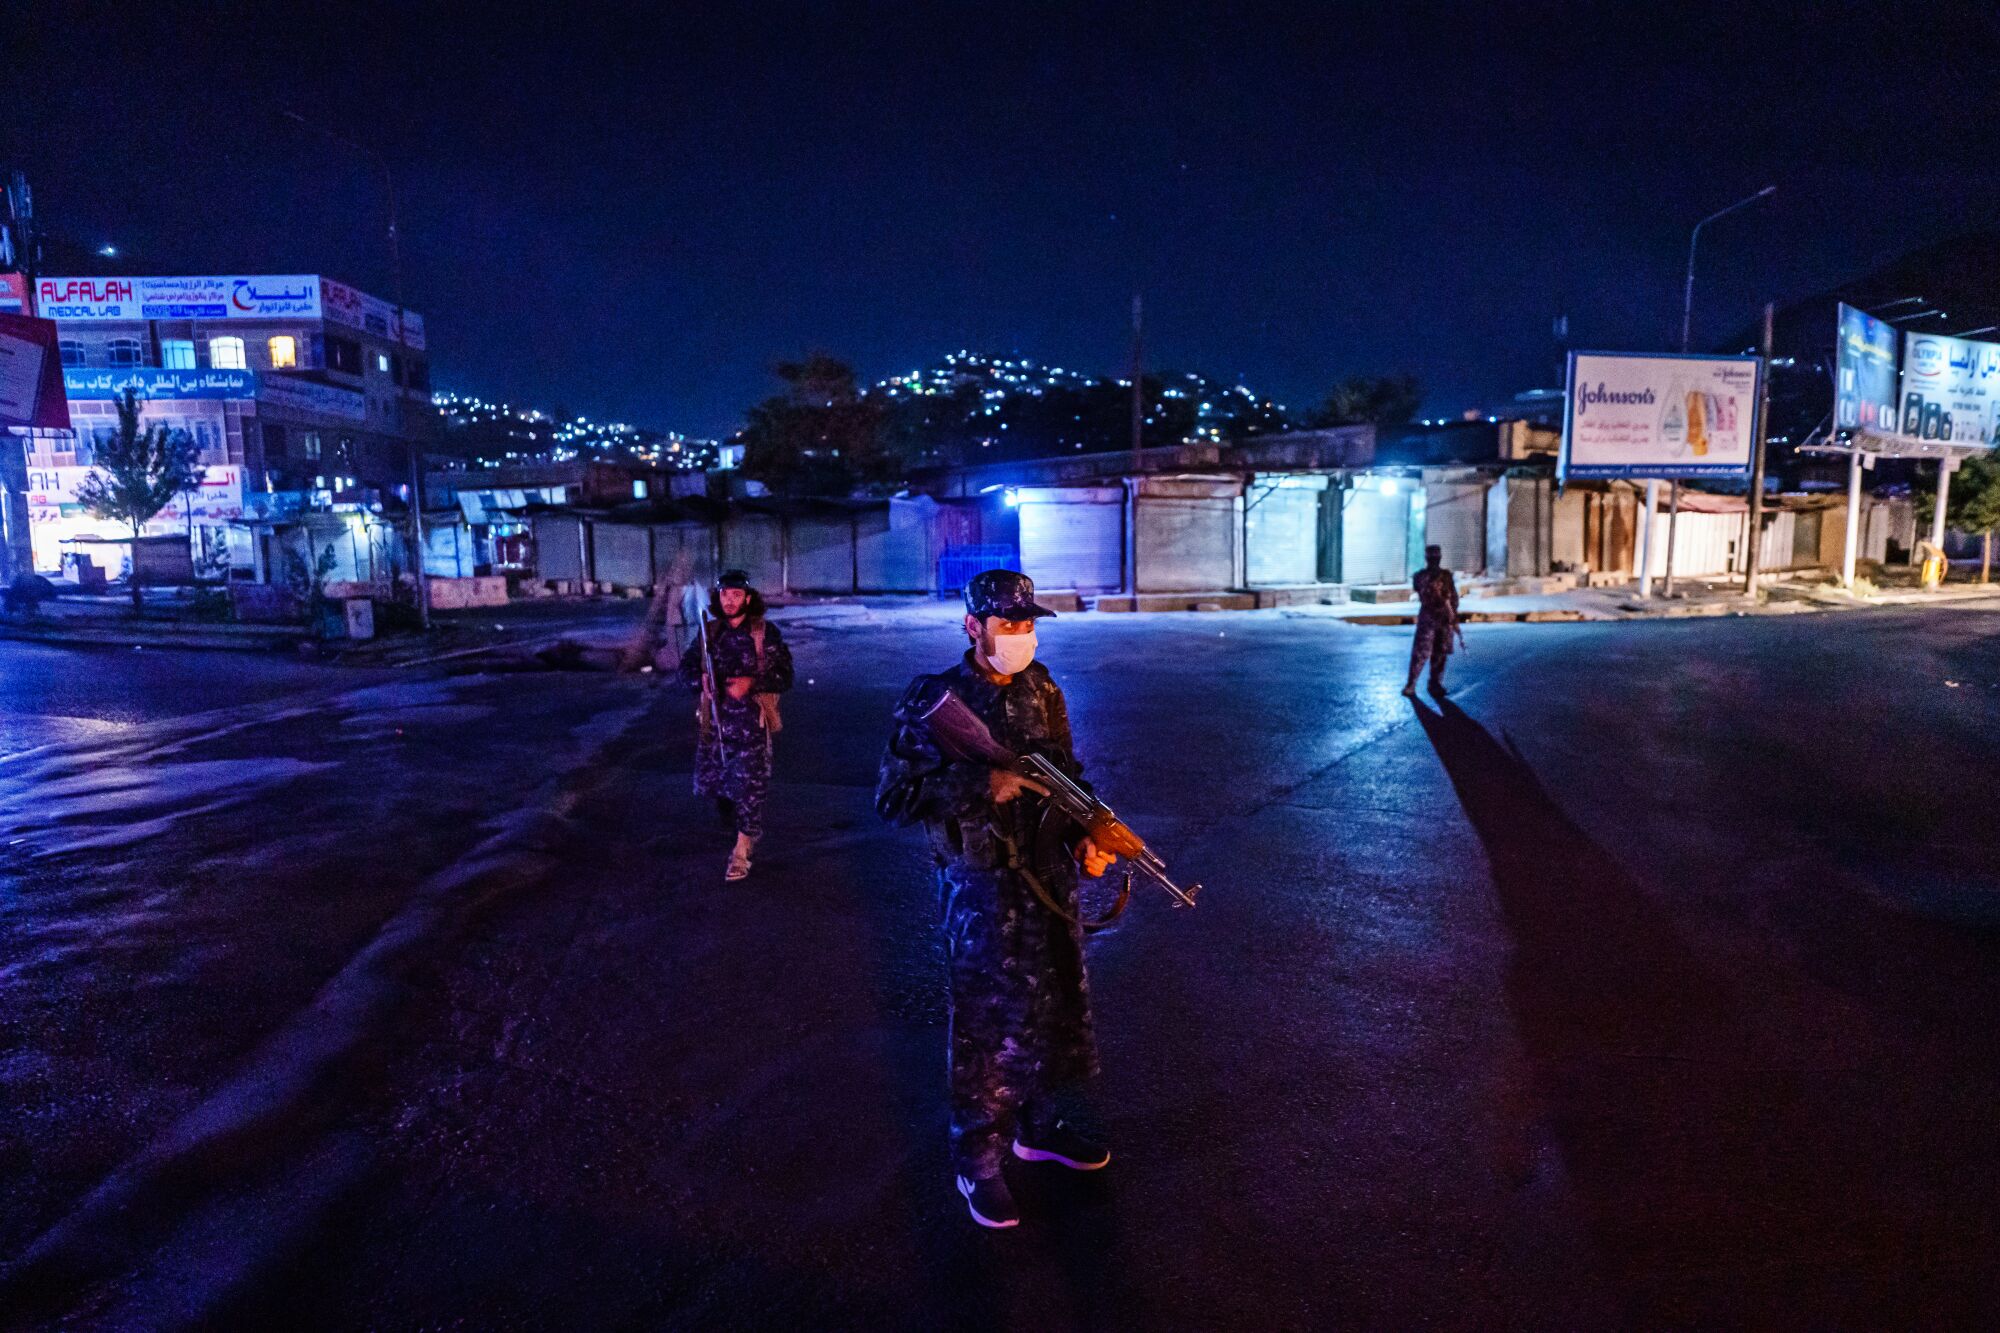 Men in fatigues stand holding their weapons in front of buildings with lights on at night.